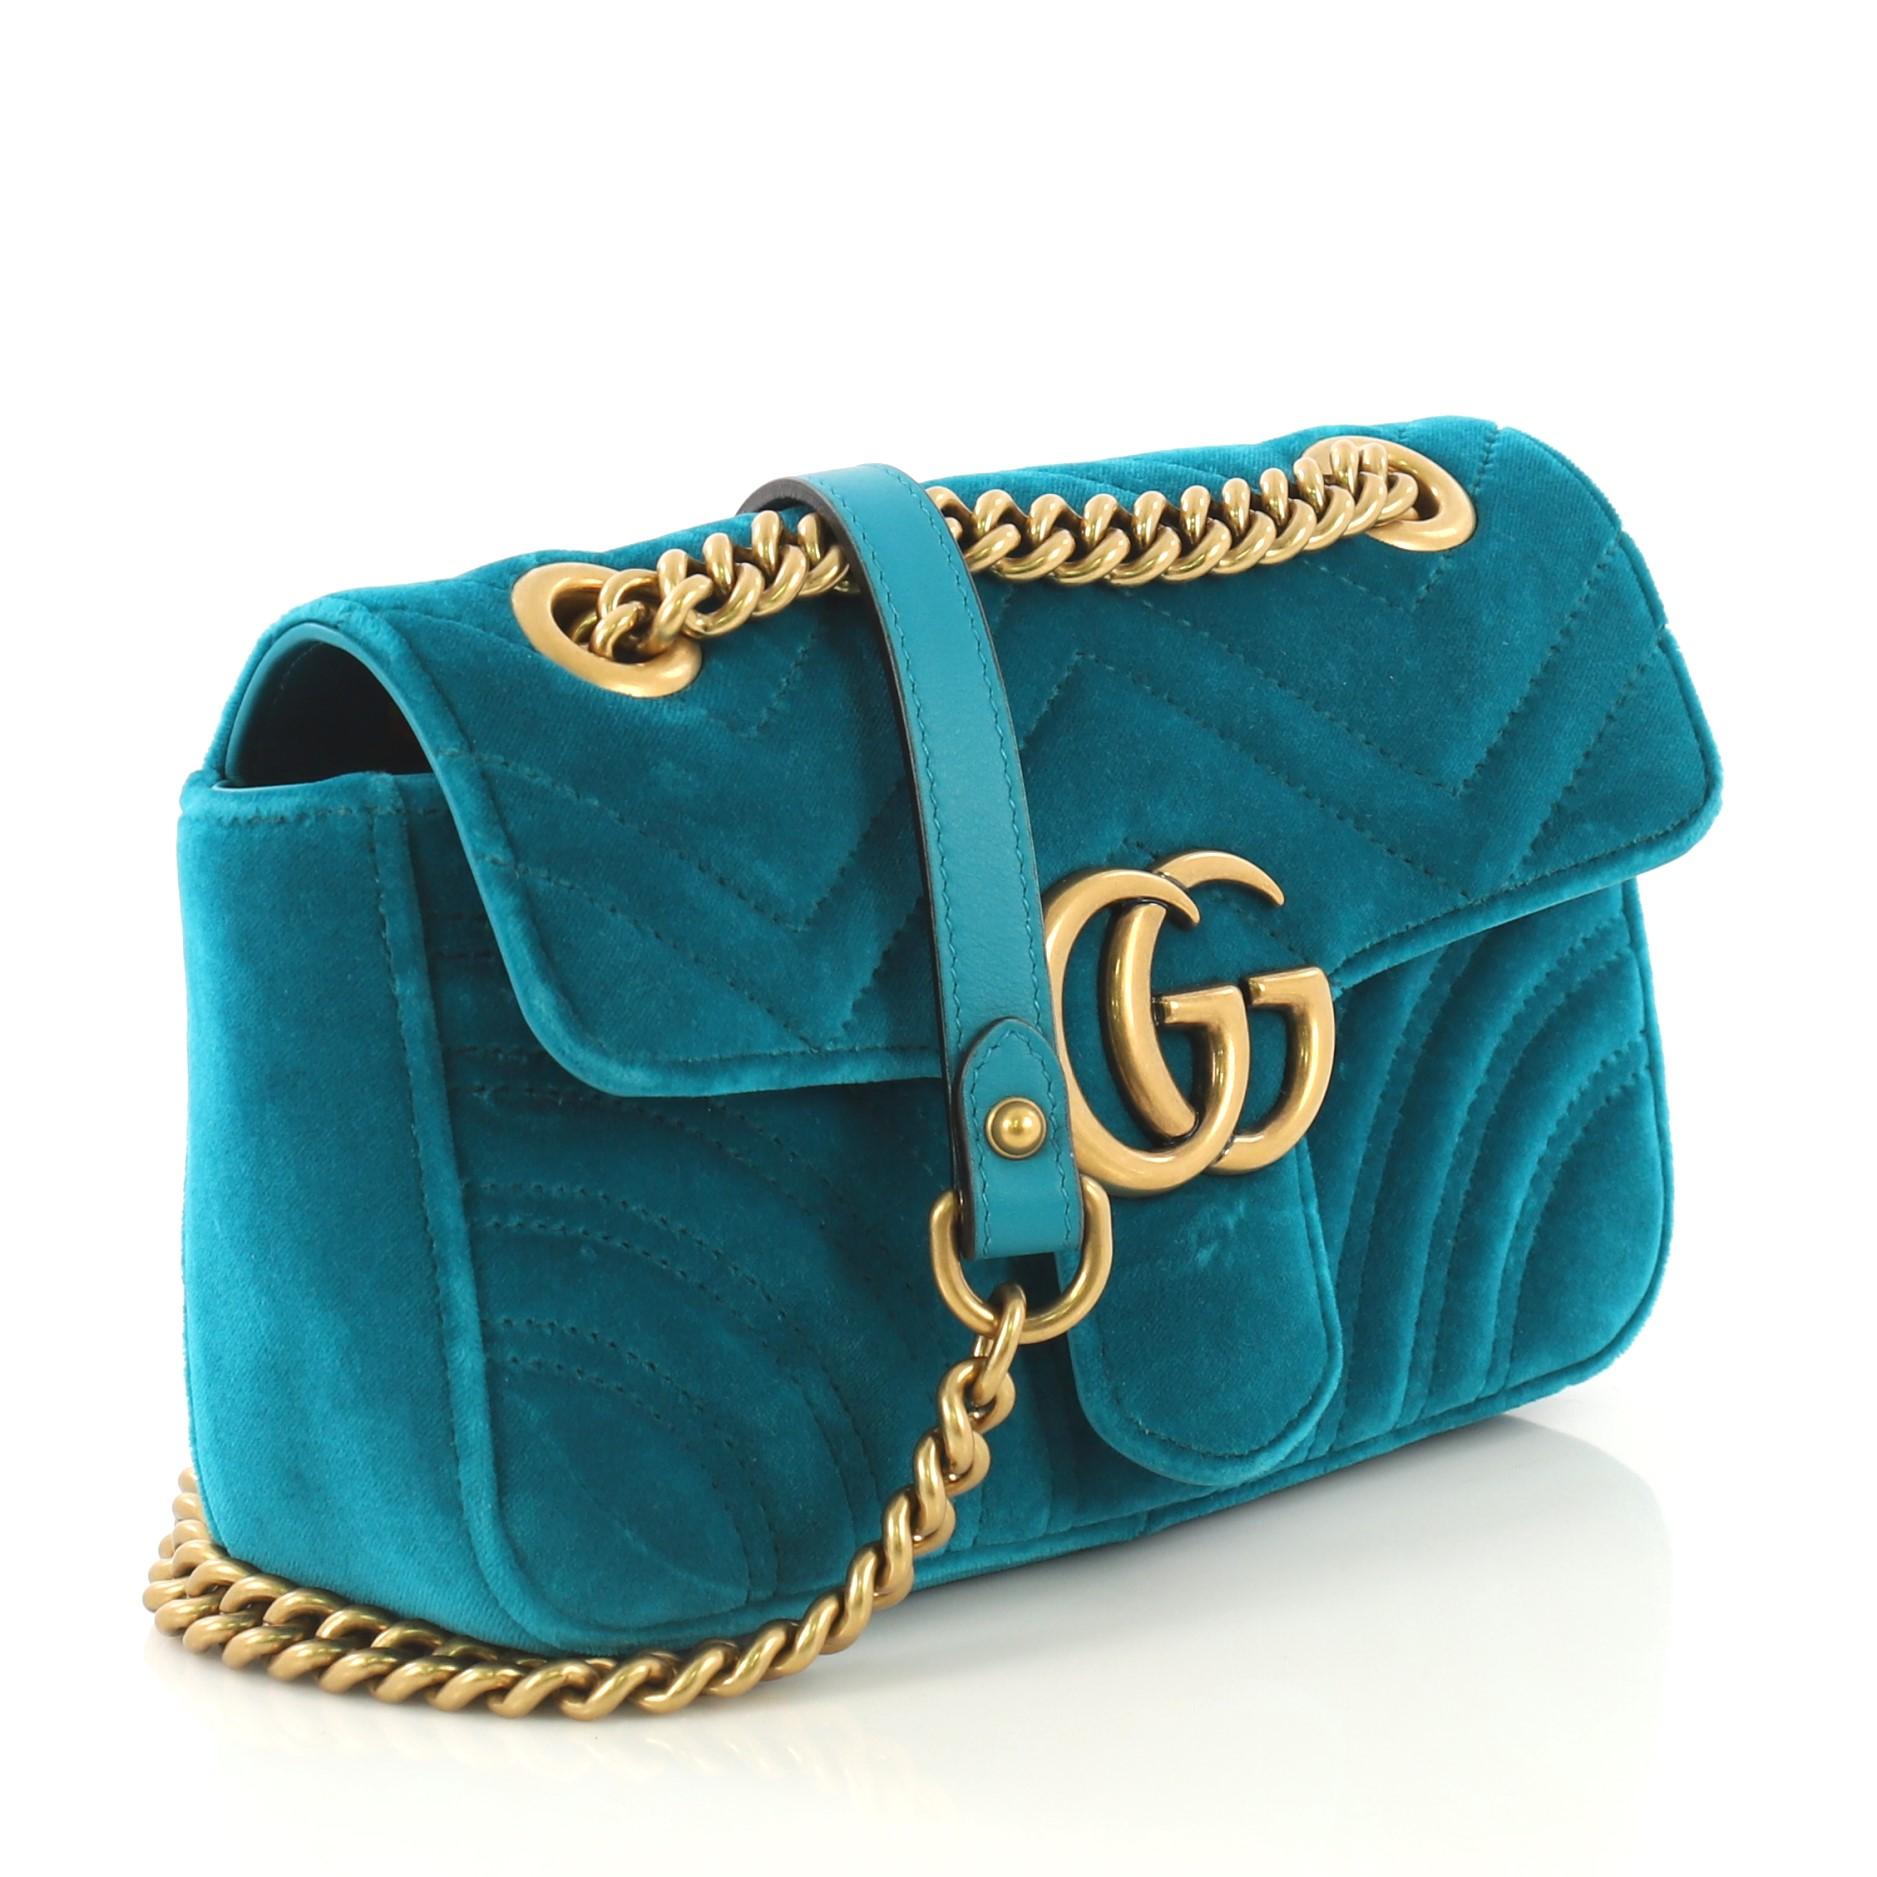 This Gucci GG Marmont Flap Bag Matelasse Velvet Mini, crafted from teal matelasse velvet, features chain link strap with leather pad, flap top with GG logo, and aged gold-tone hardware. Its push-lock closure opens to a pink satin interior with slip